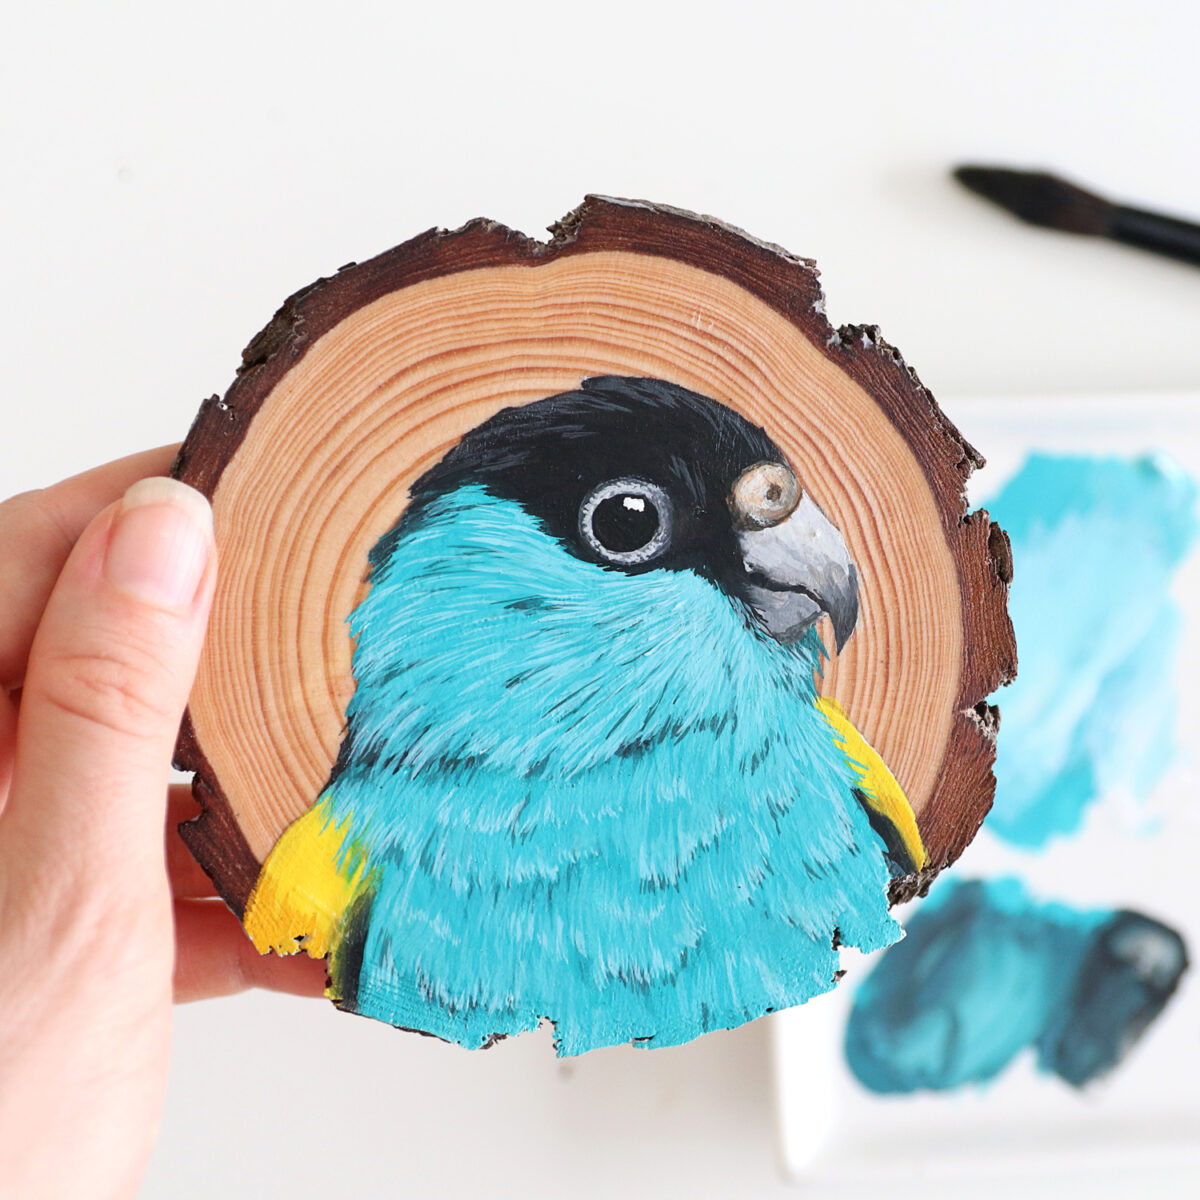 100 Days Of Birds A Marvelous Series Of Gouache On Wood Paintings By Deanna Maree (13)